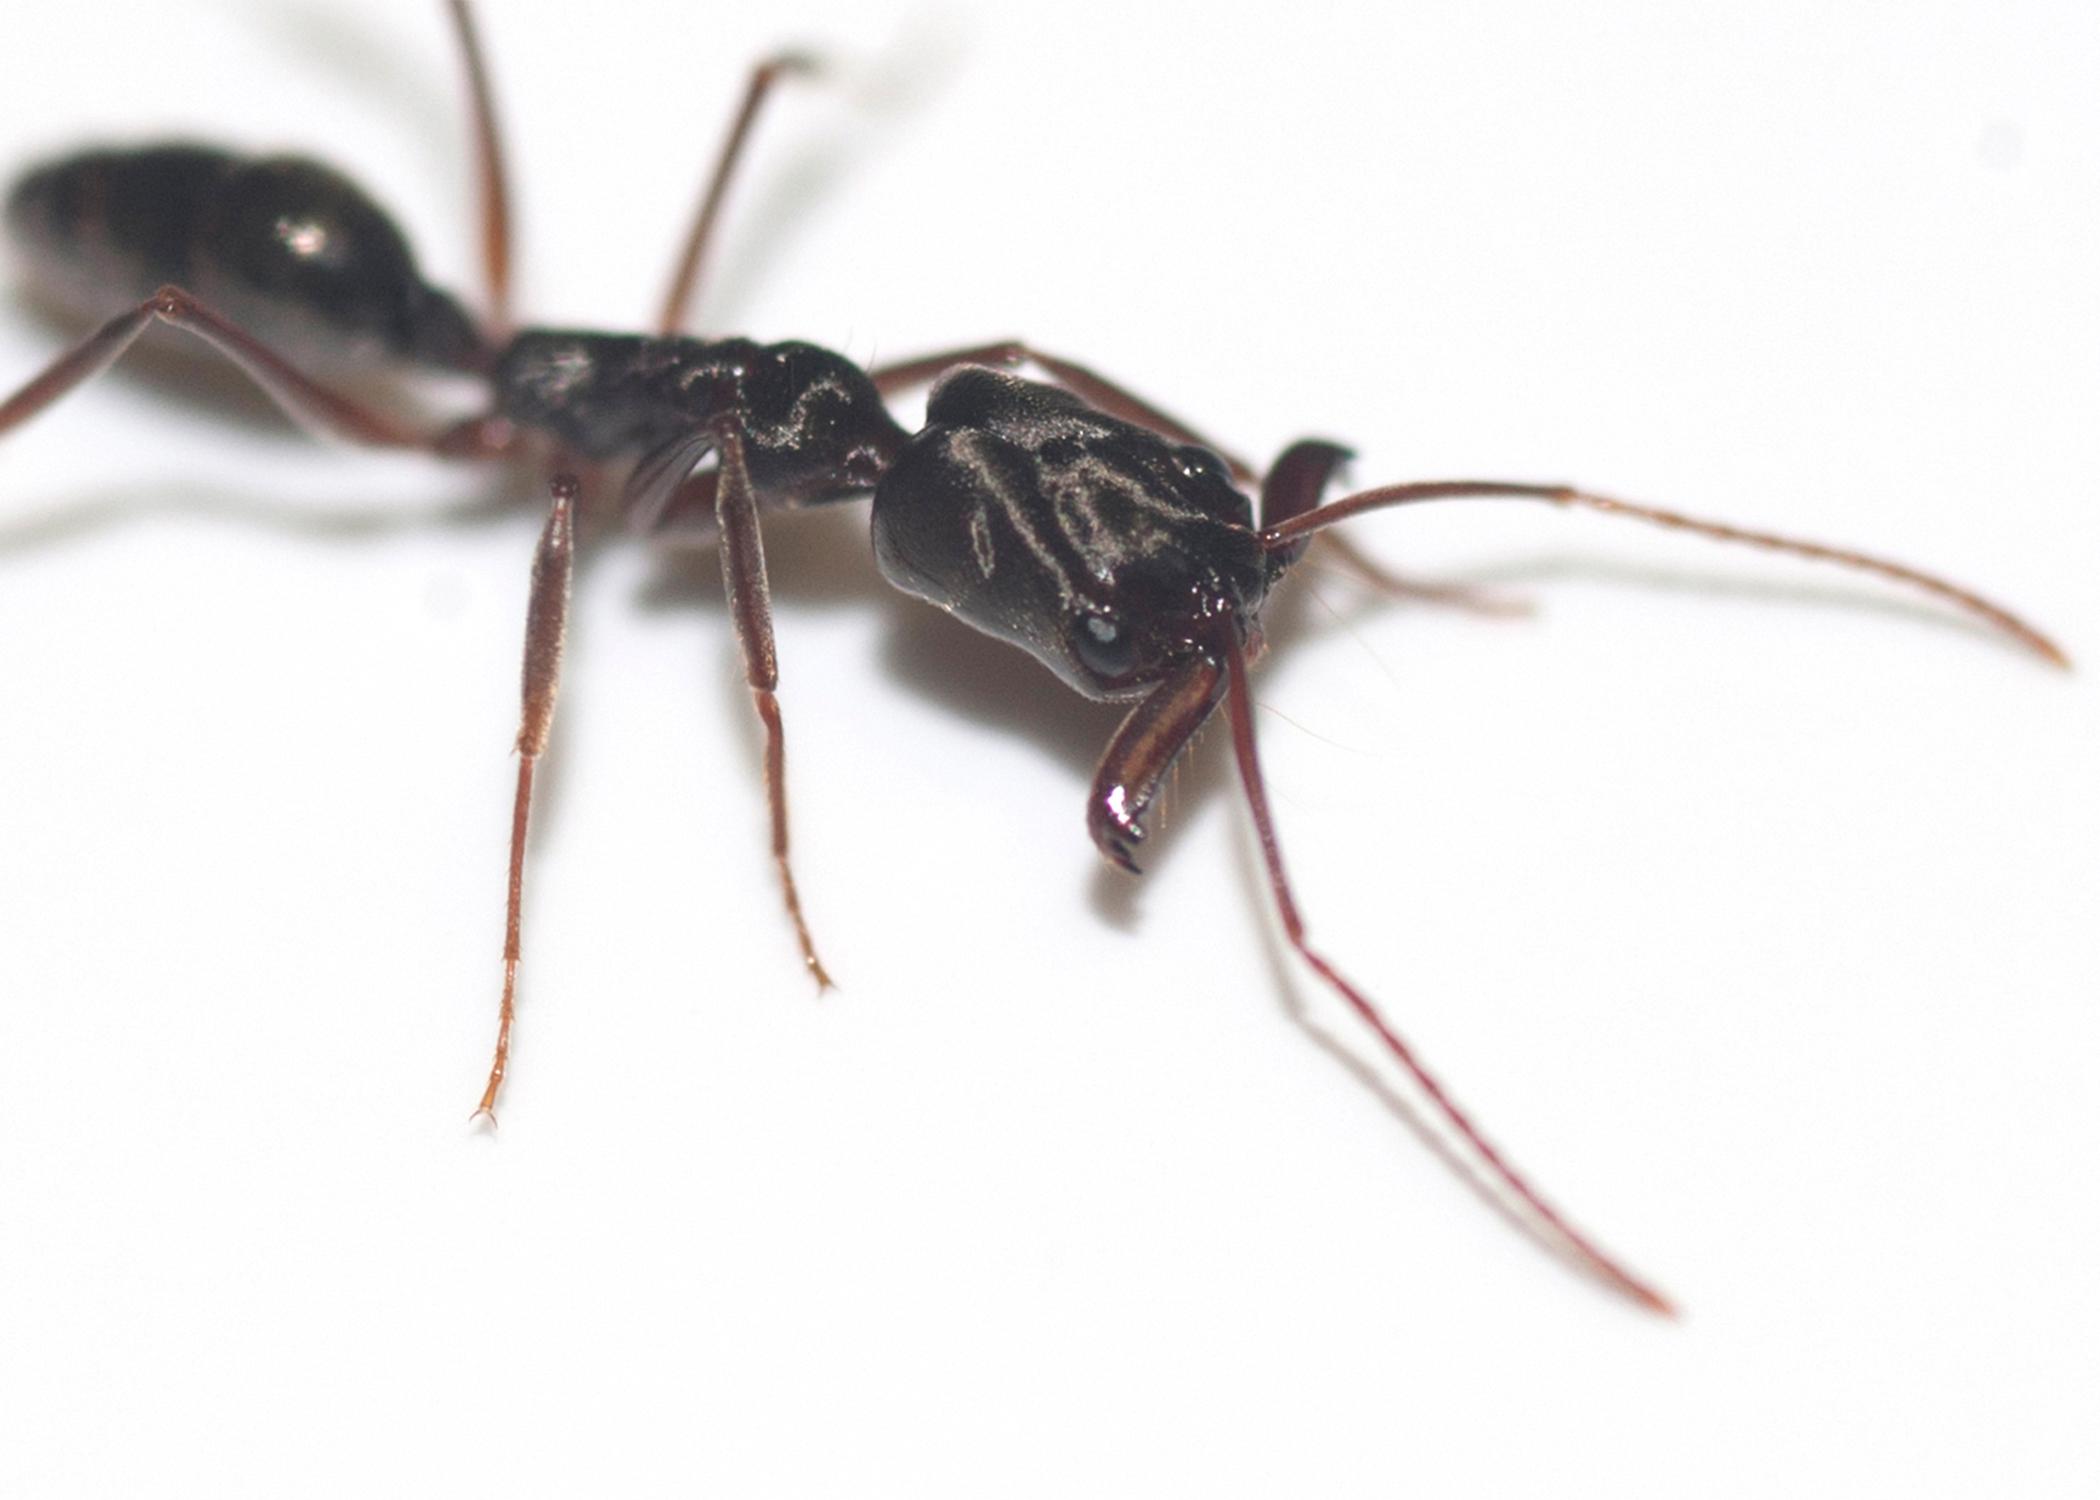 Trapjaw ants can snap their extremely large and powerful mandibles together to catch prey or perform a defensive maneuver that allows them to jump several inches away from danger. (Photo by MSU Ag Communications/Kat Lawrence)